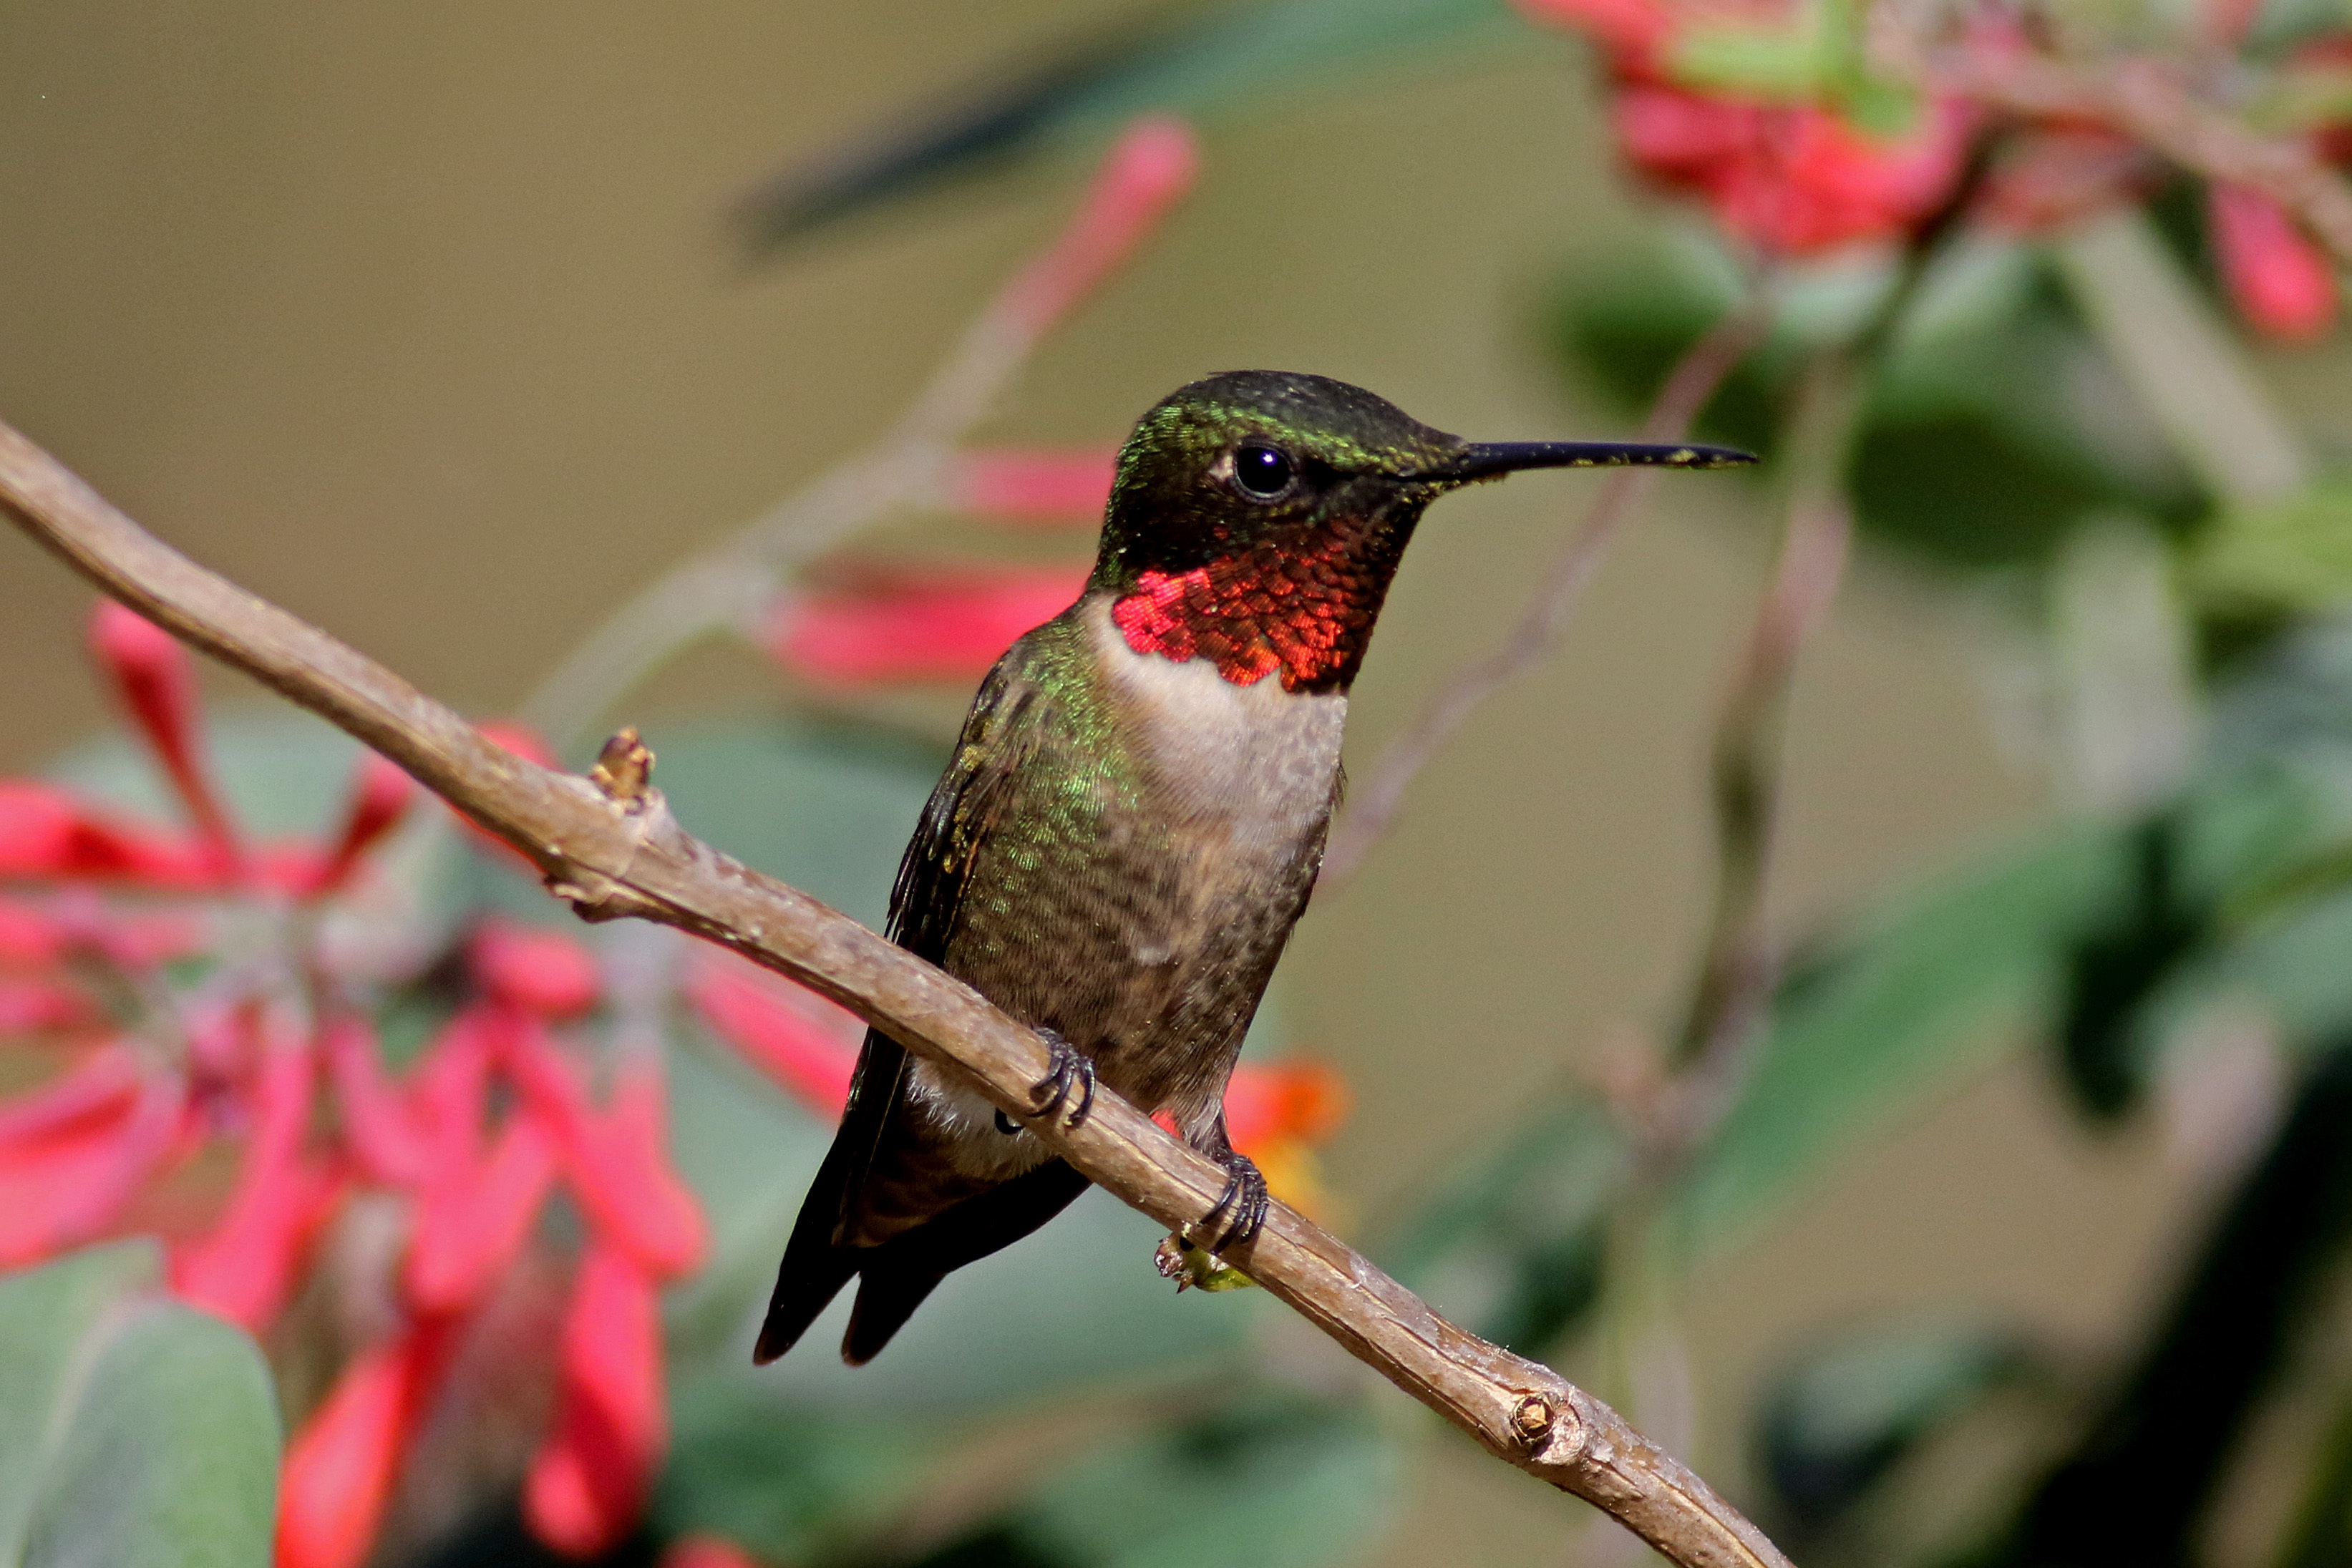 A male Ruby-throated Hummingbird perched among native Coral Honeysuckle flowers. Photo: Will Stuart